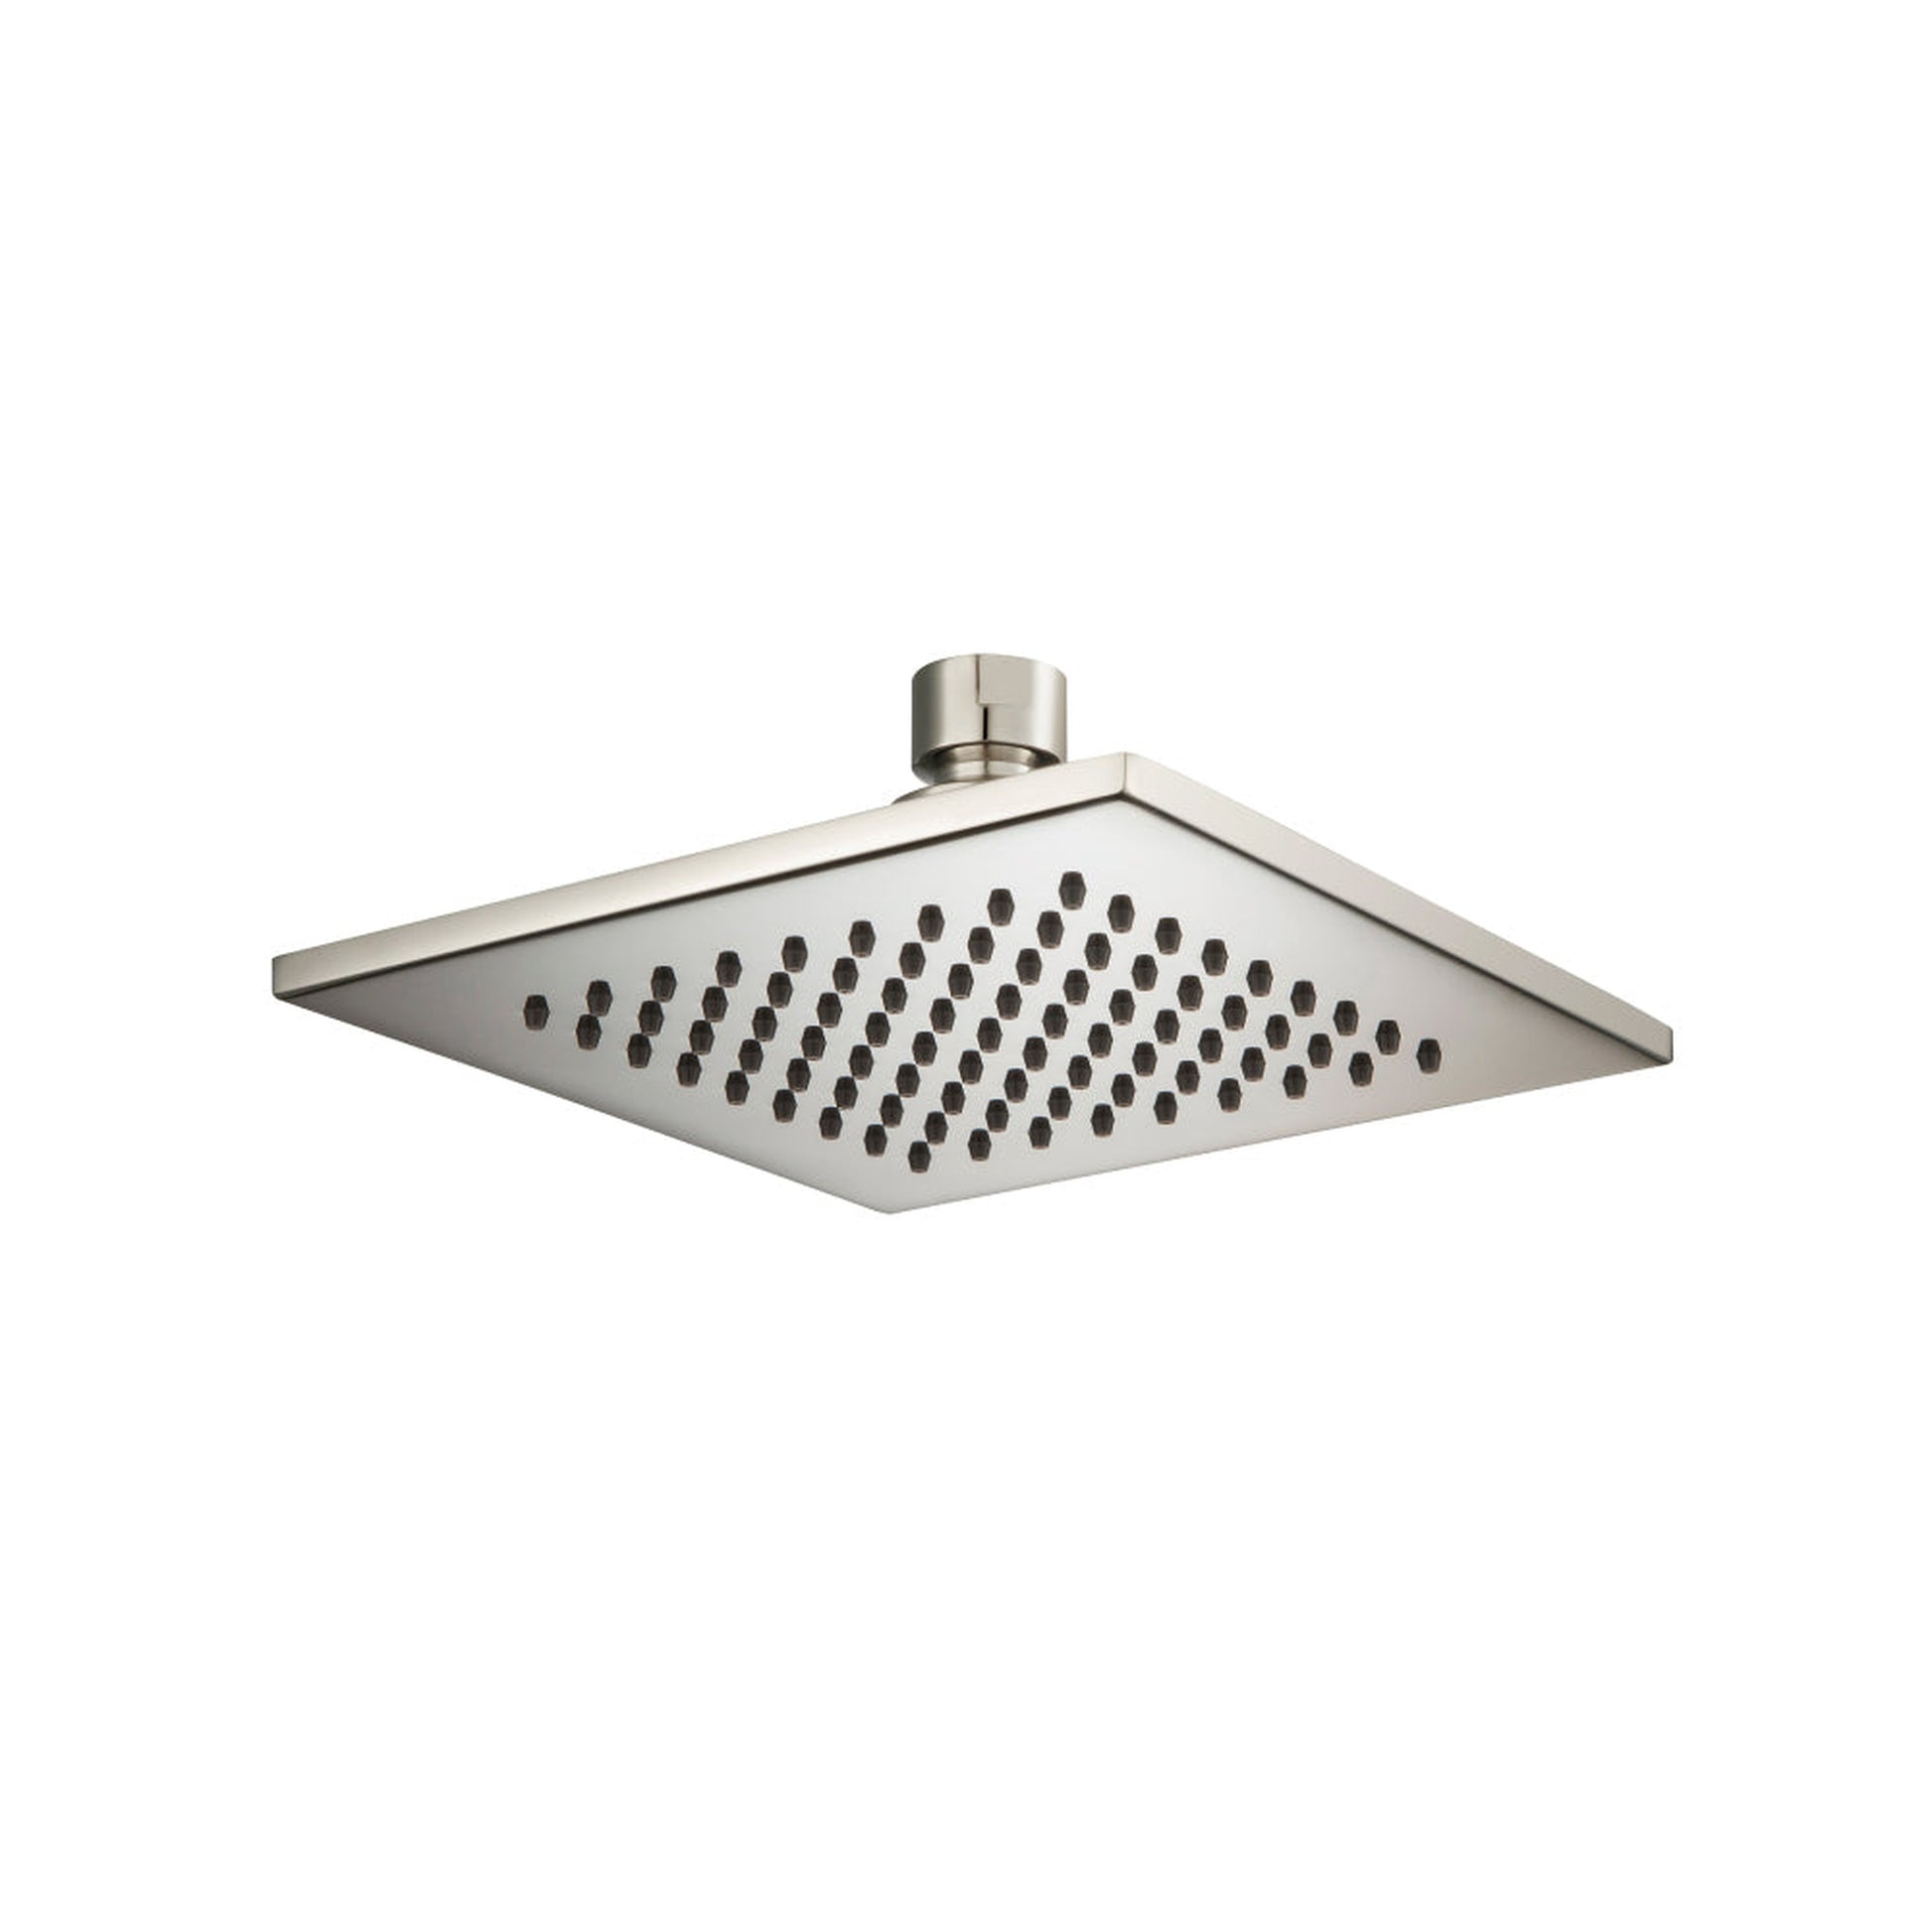 Isenberg Universal Fixtures 6" Single Function Square Polished Nickel PVD Solid Brass Rain Shower Head